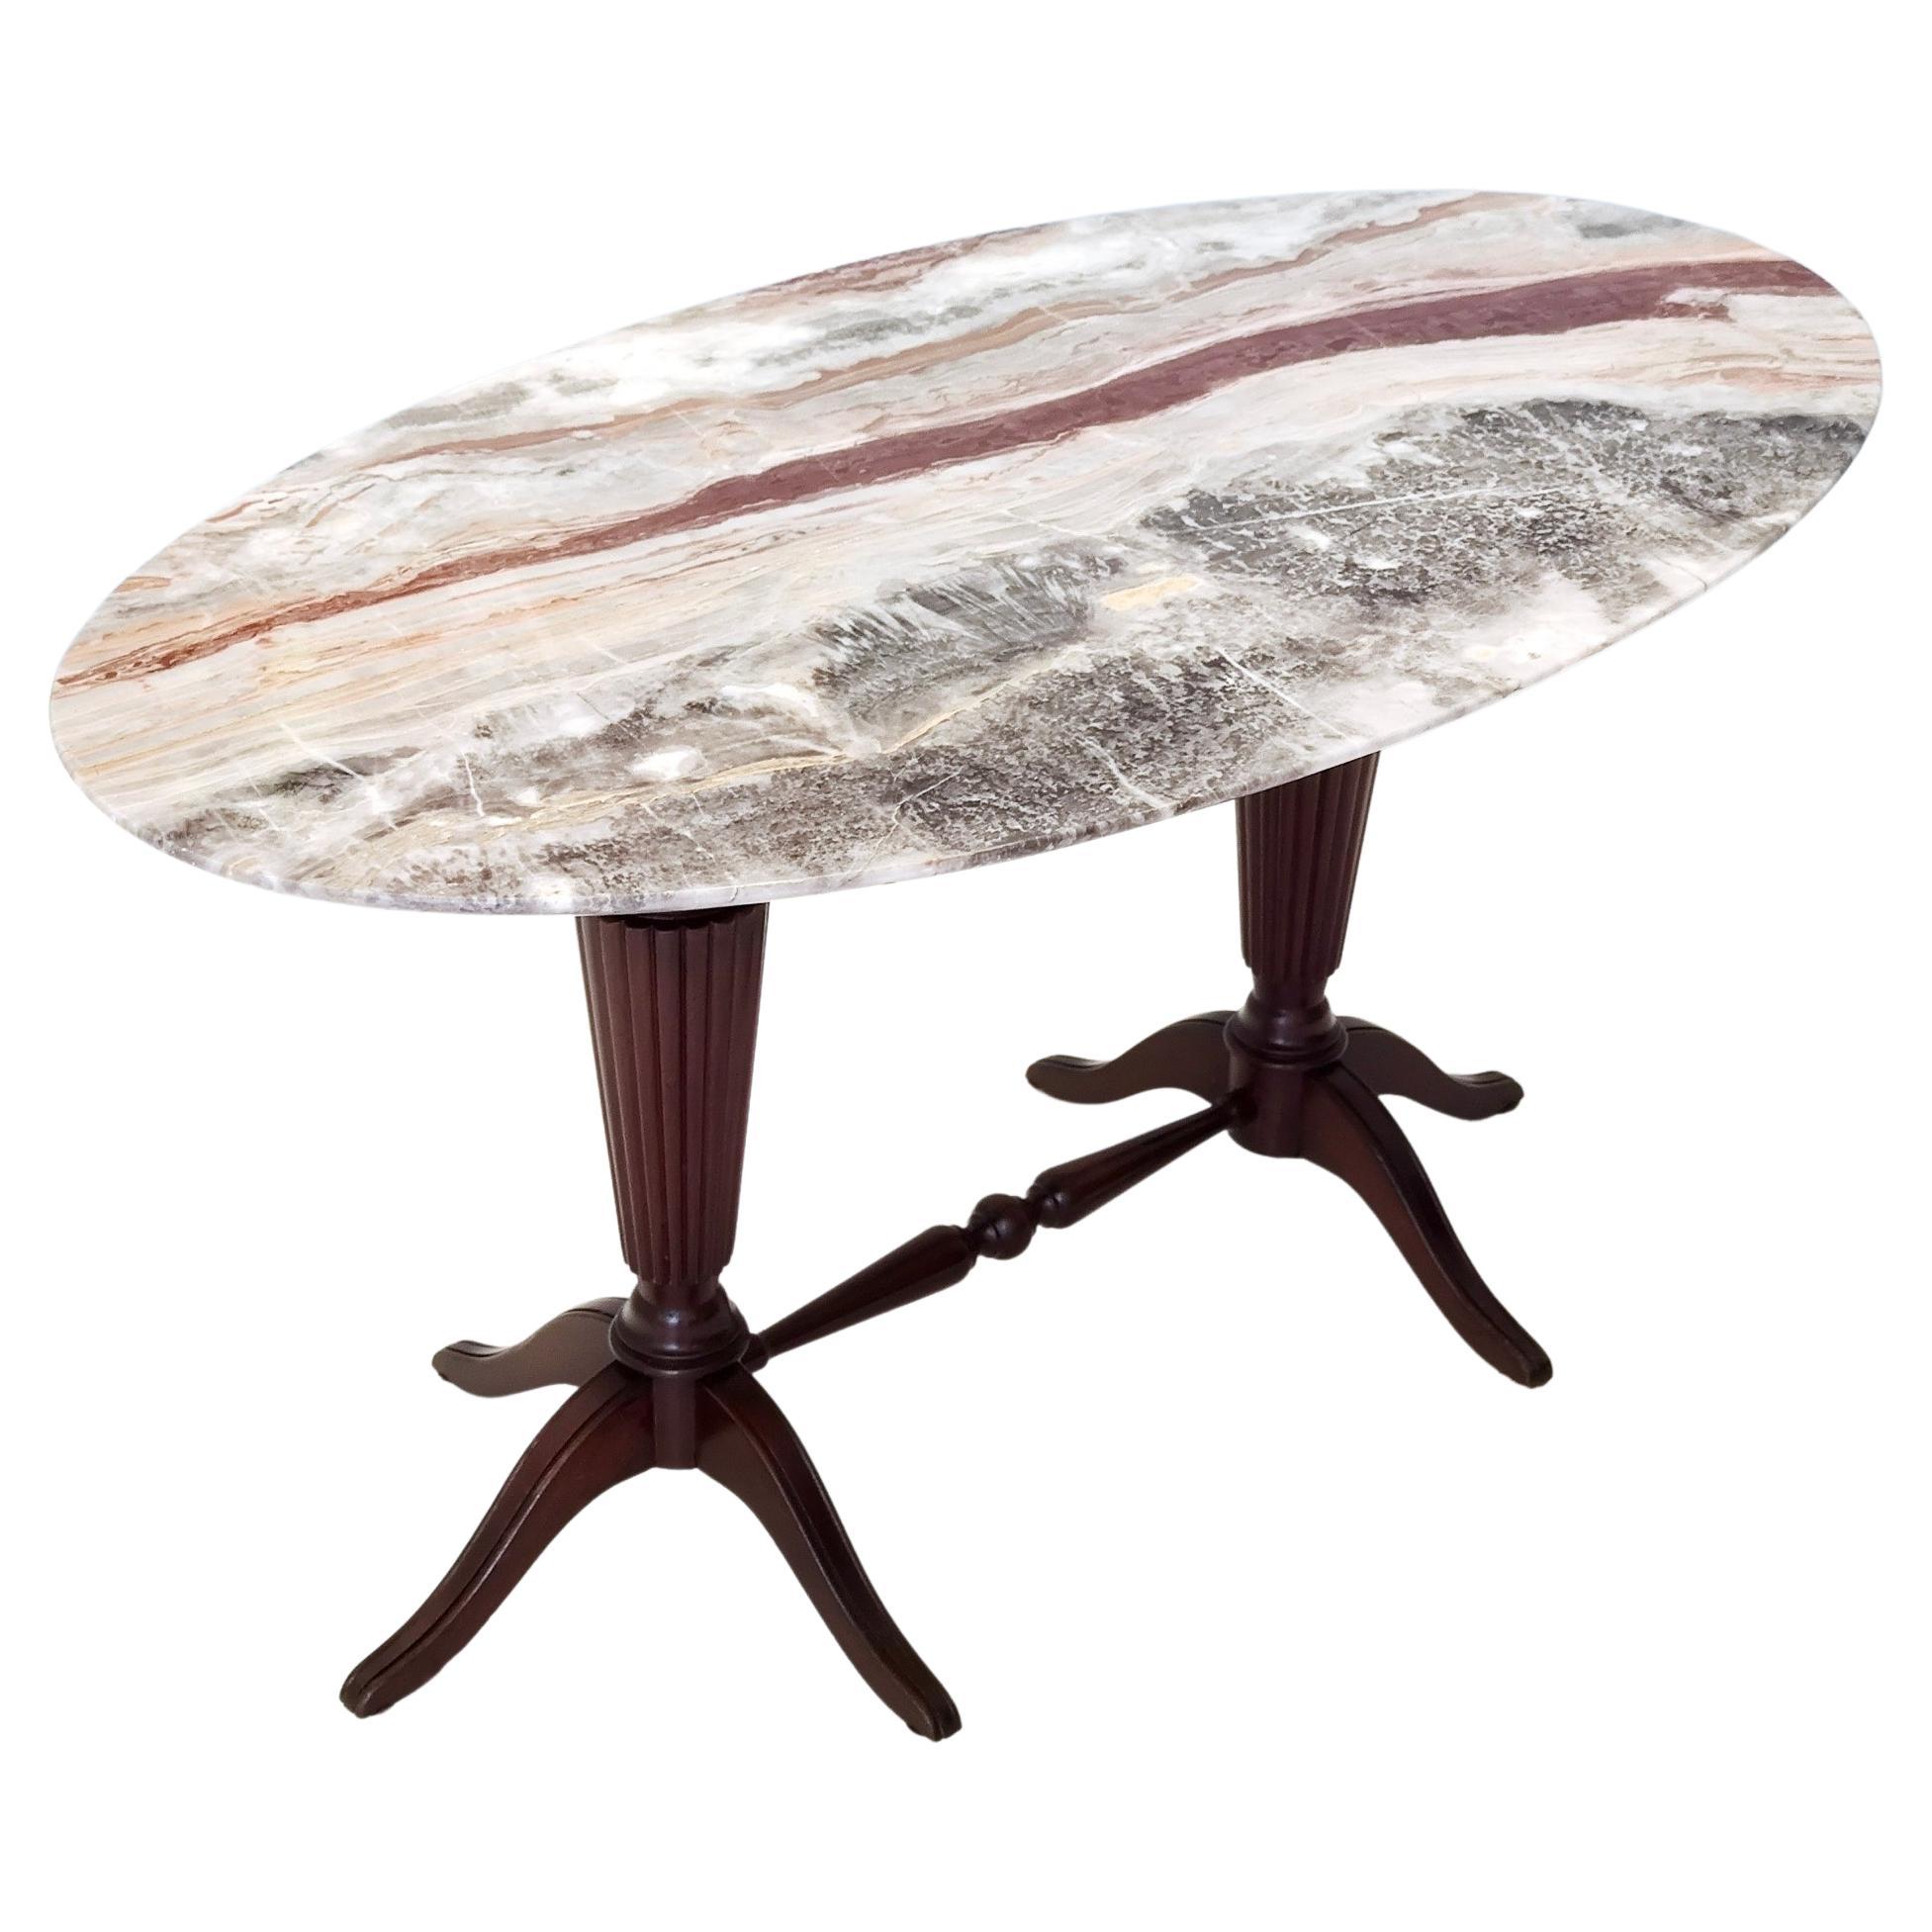 Vintage Beech Coffee Table Ascribable to Paolo Buffa with an Oval Red Onyx Top For Sale